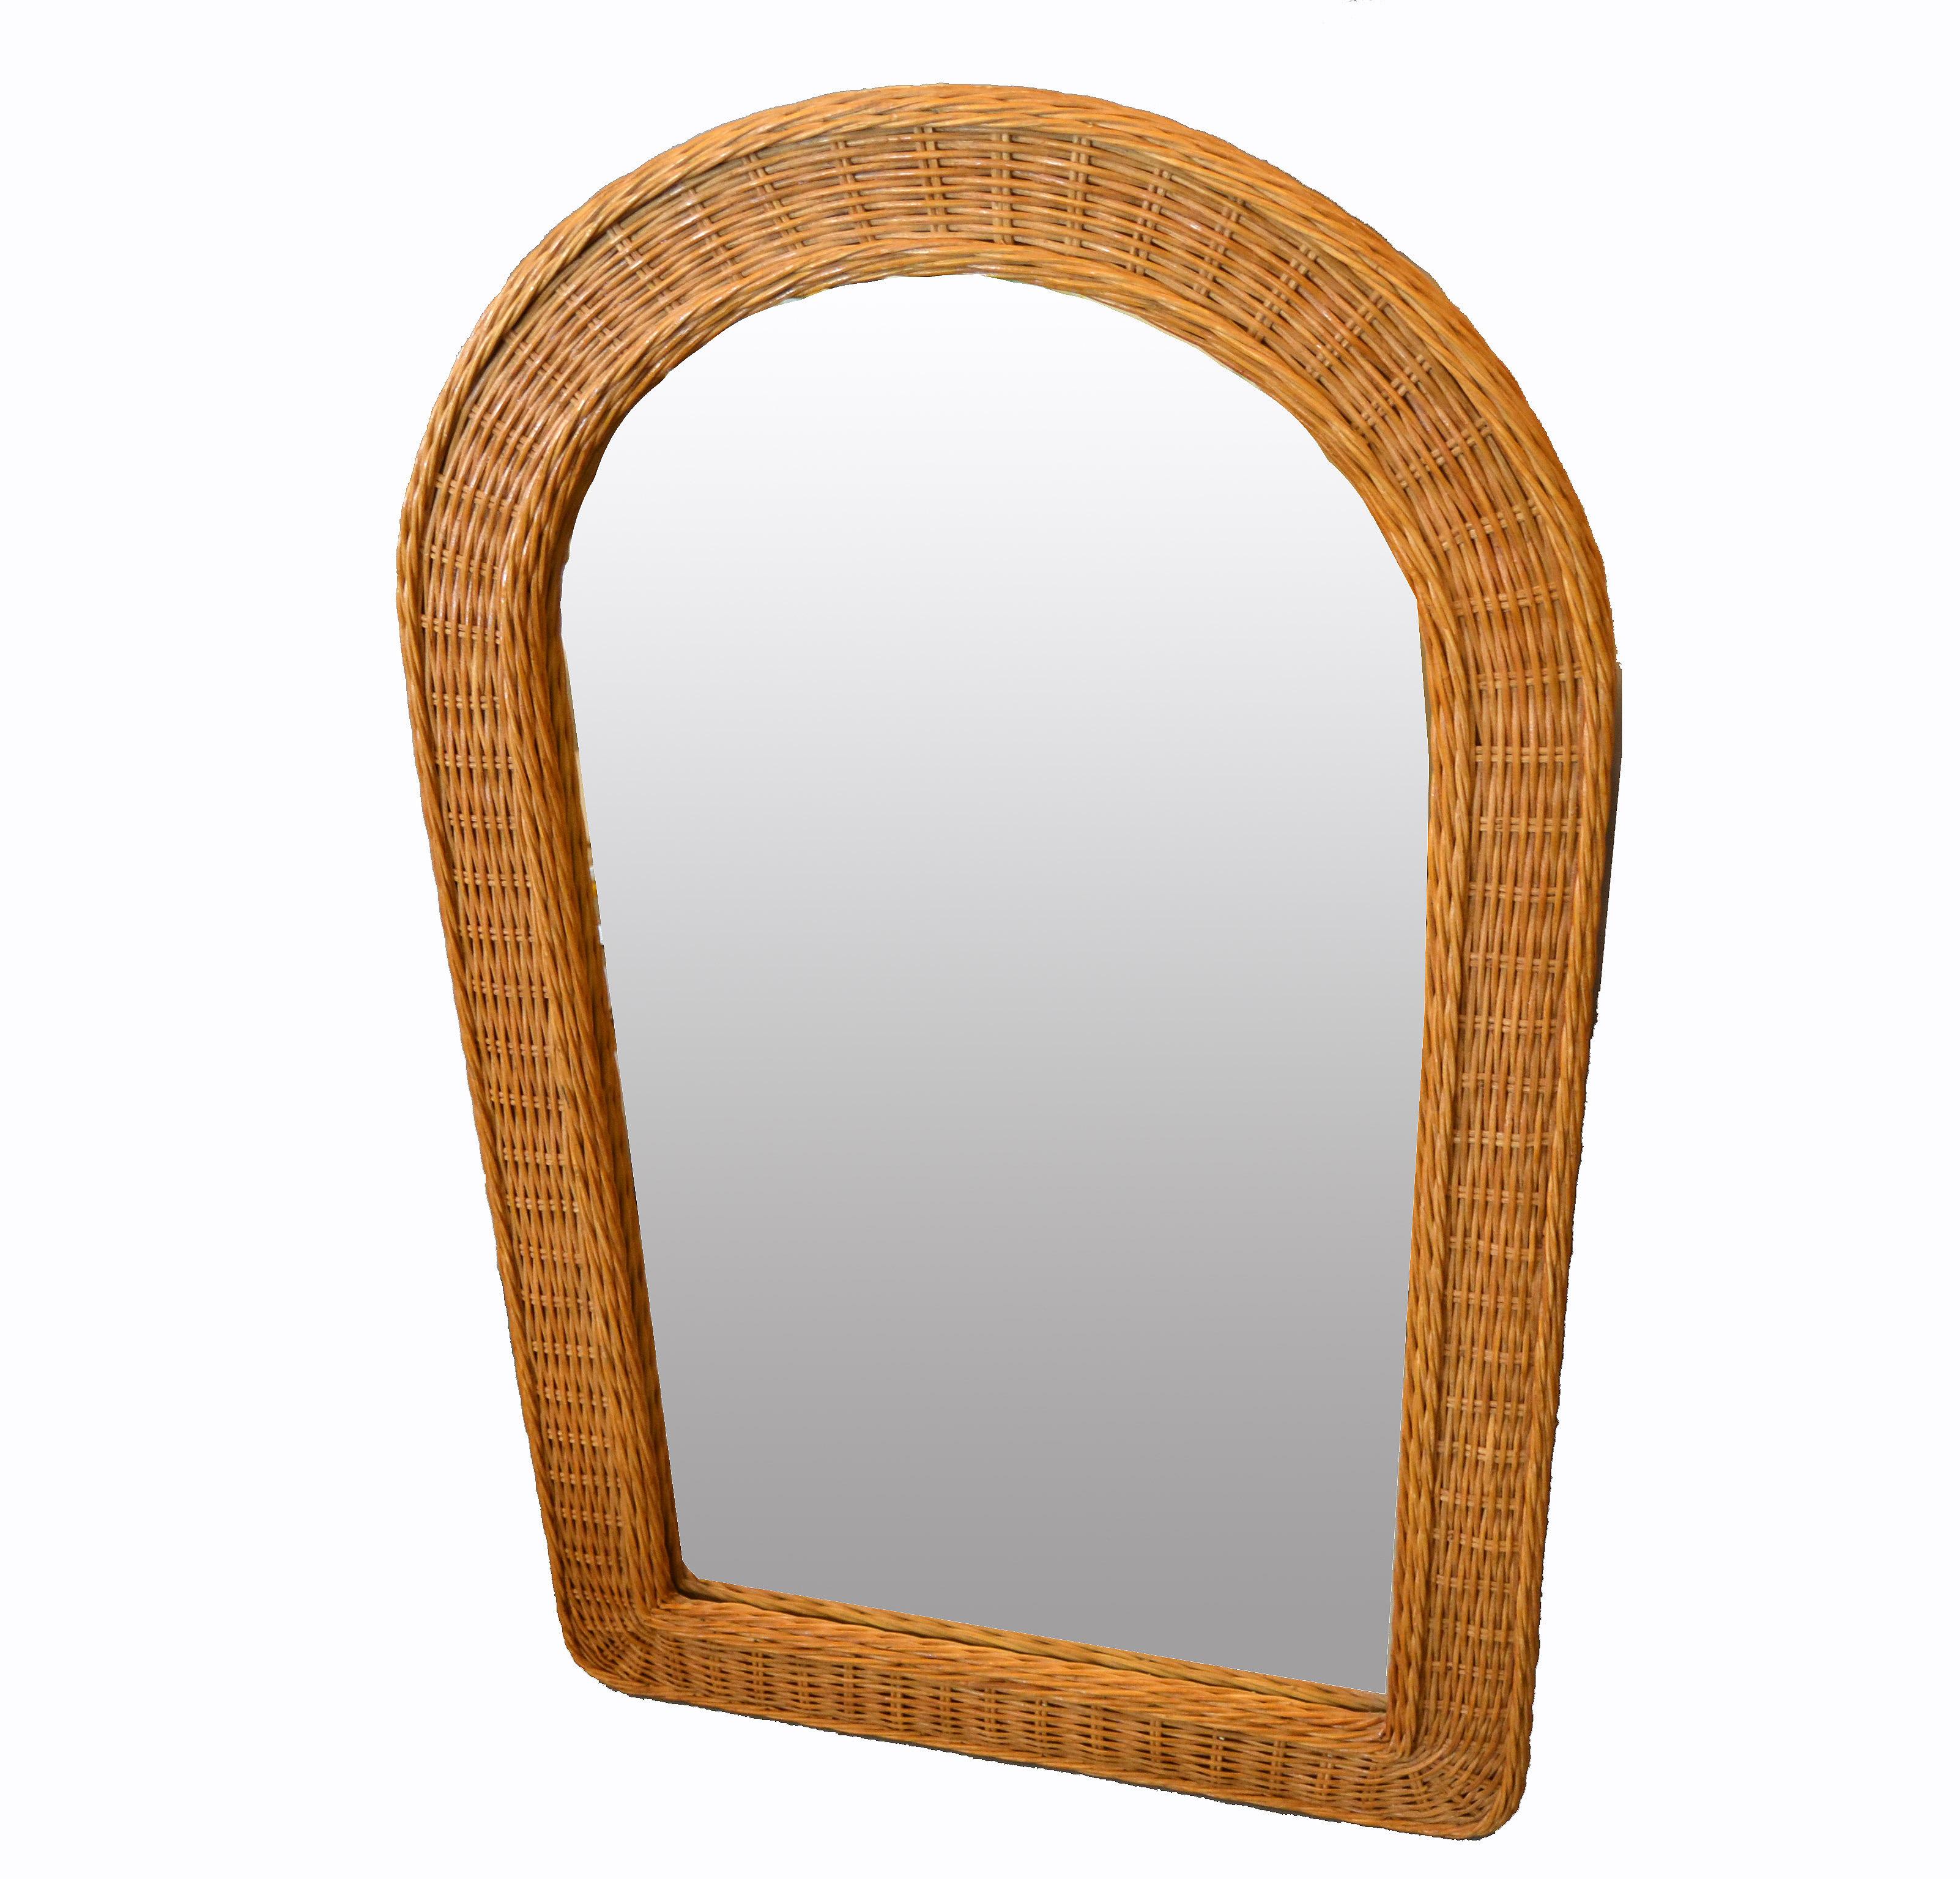 arched rattan mirror